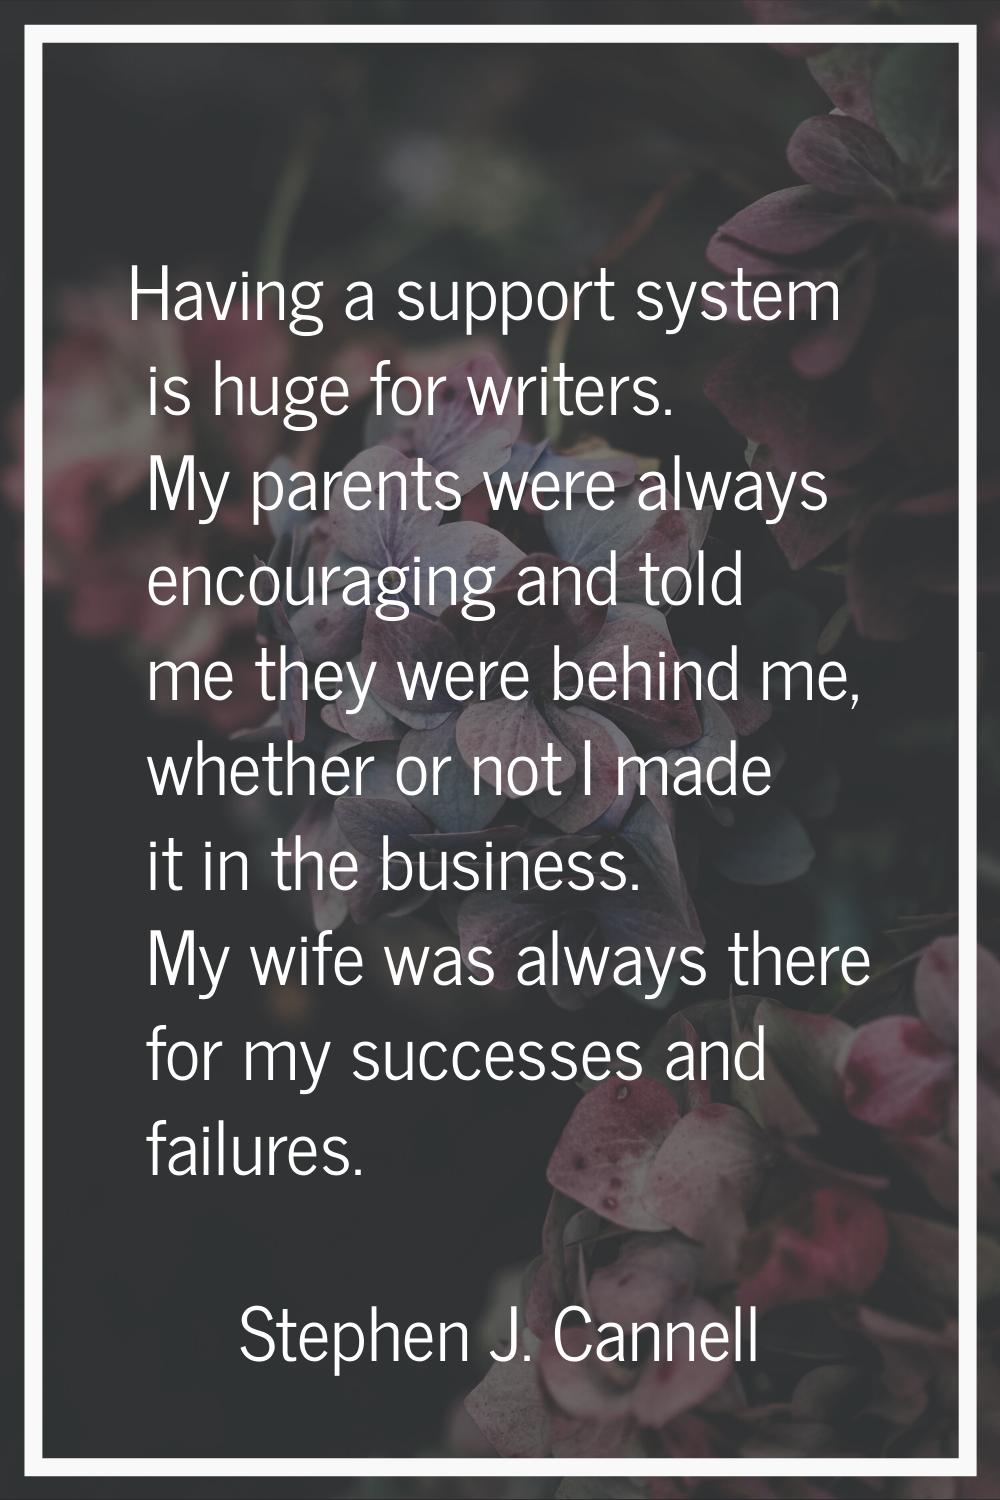 Having a support system is huge for writers. My parents were always encouraging and told me they we